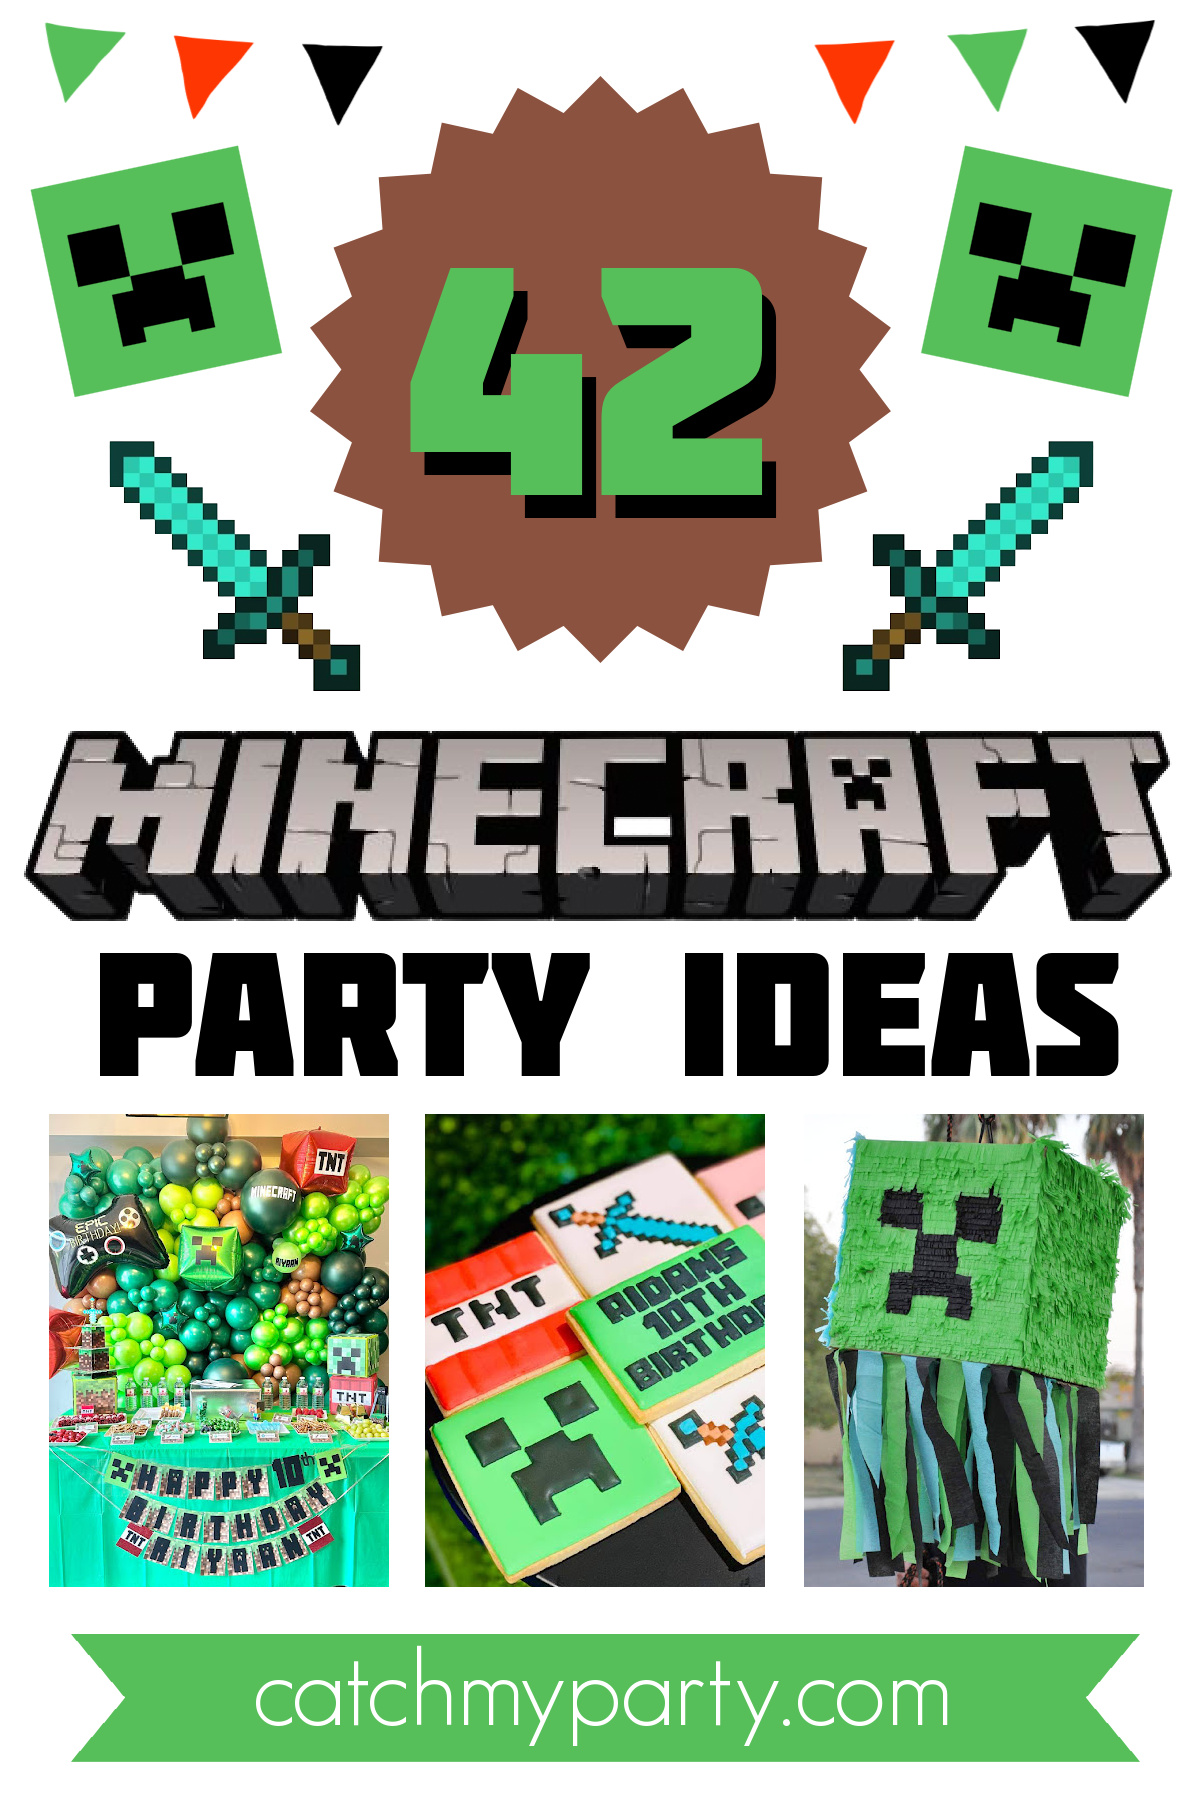 42 Awesome Minecraft Party Ideas!